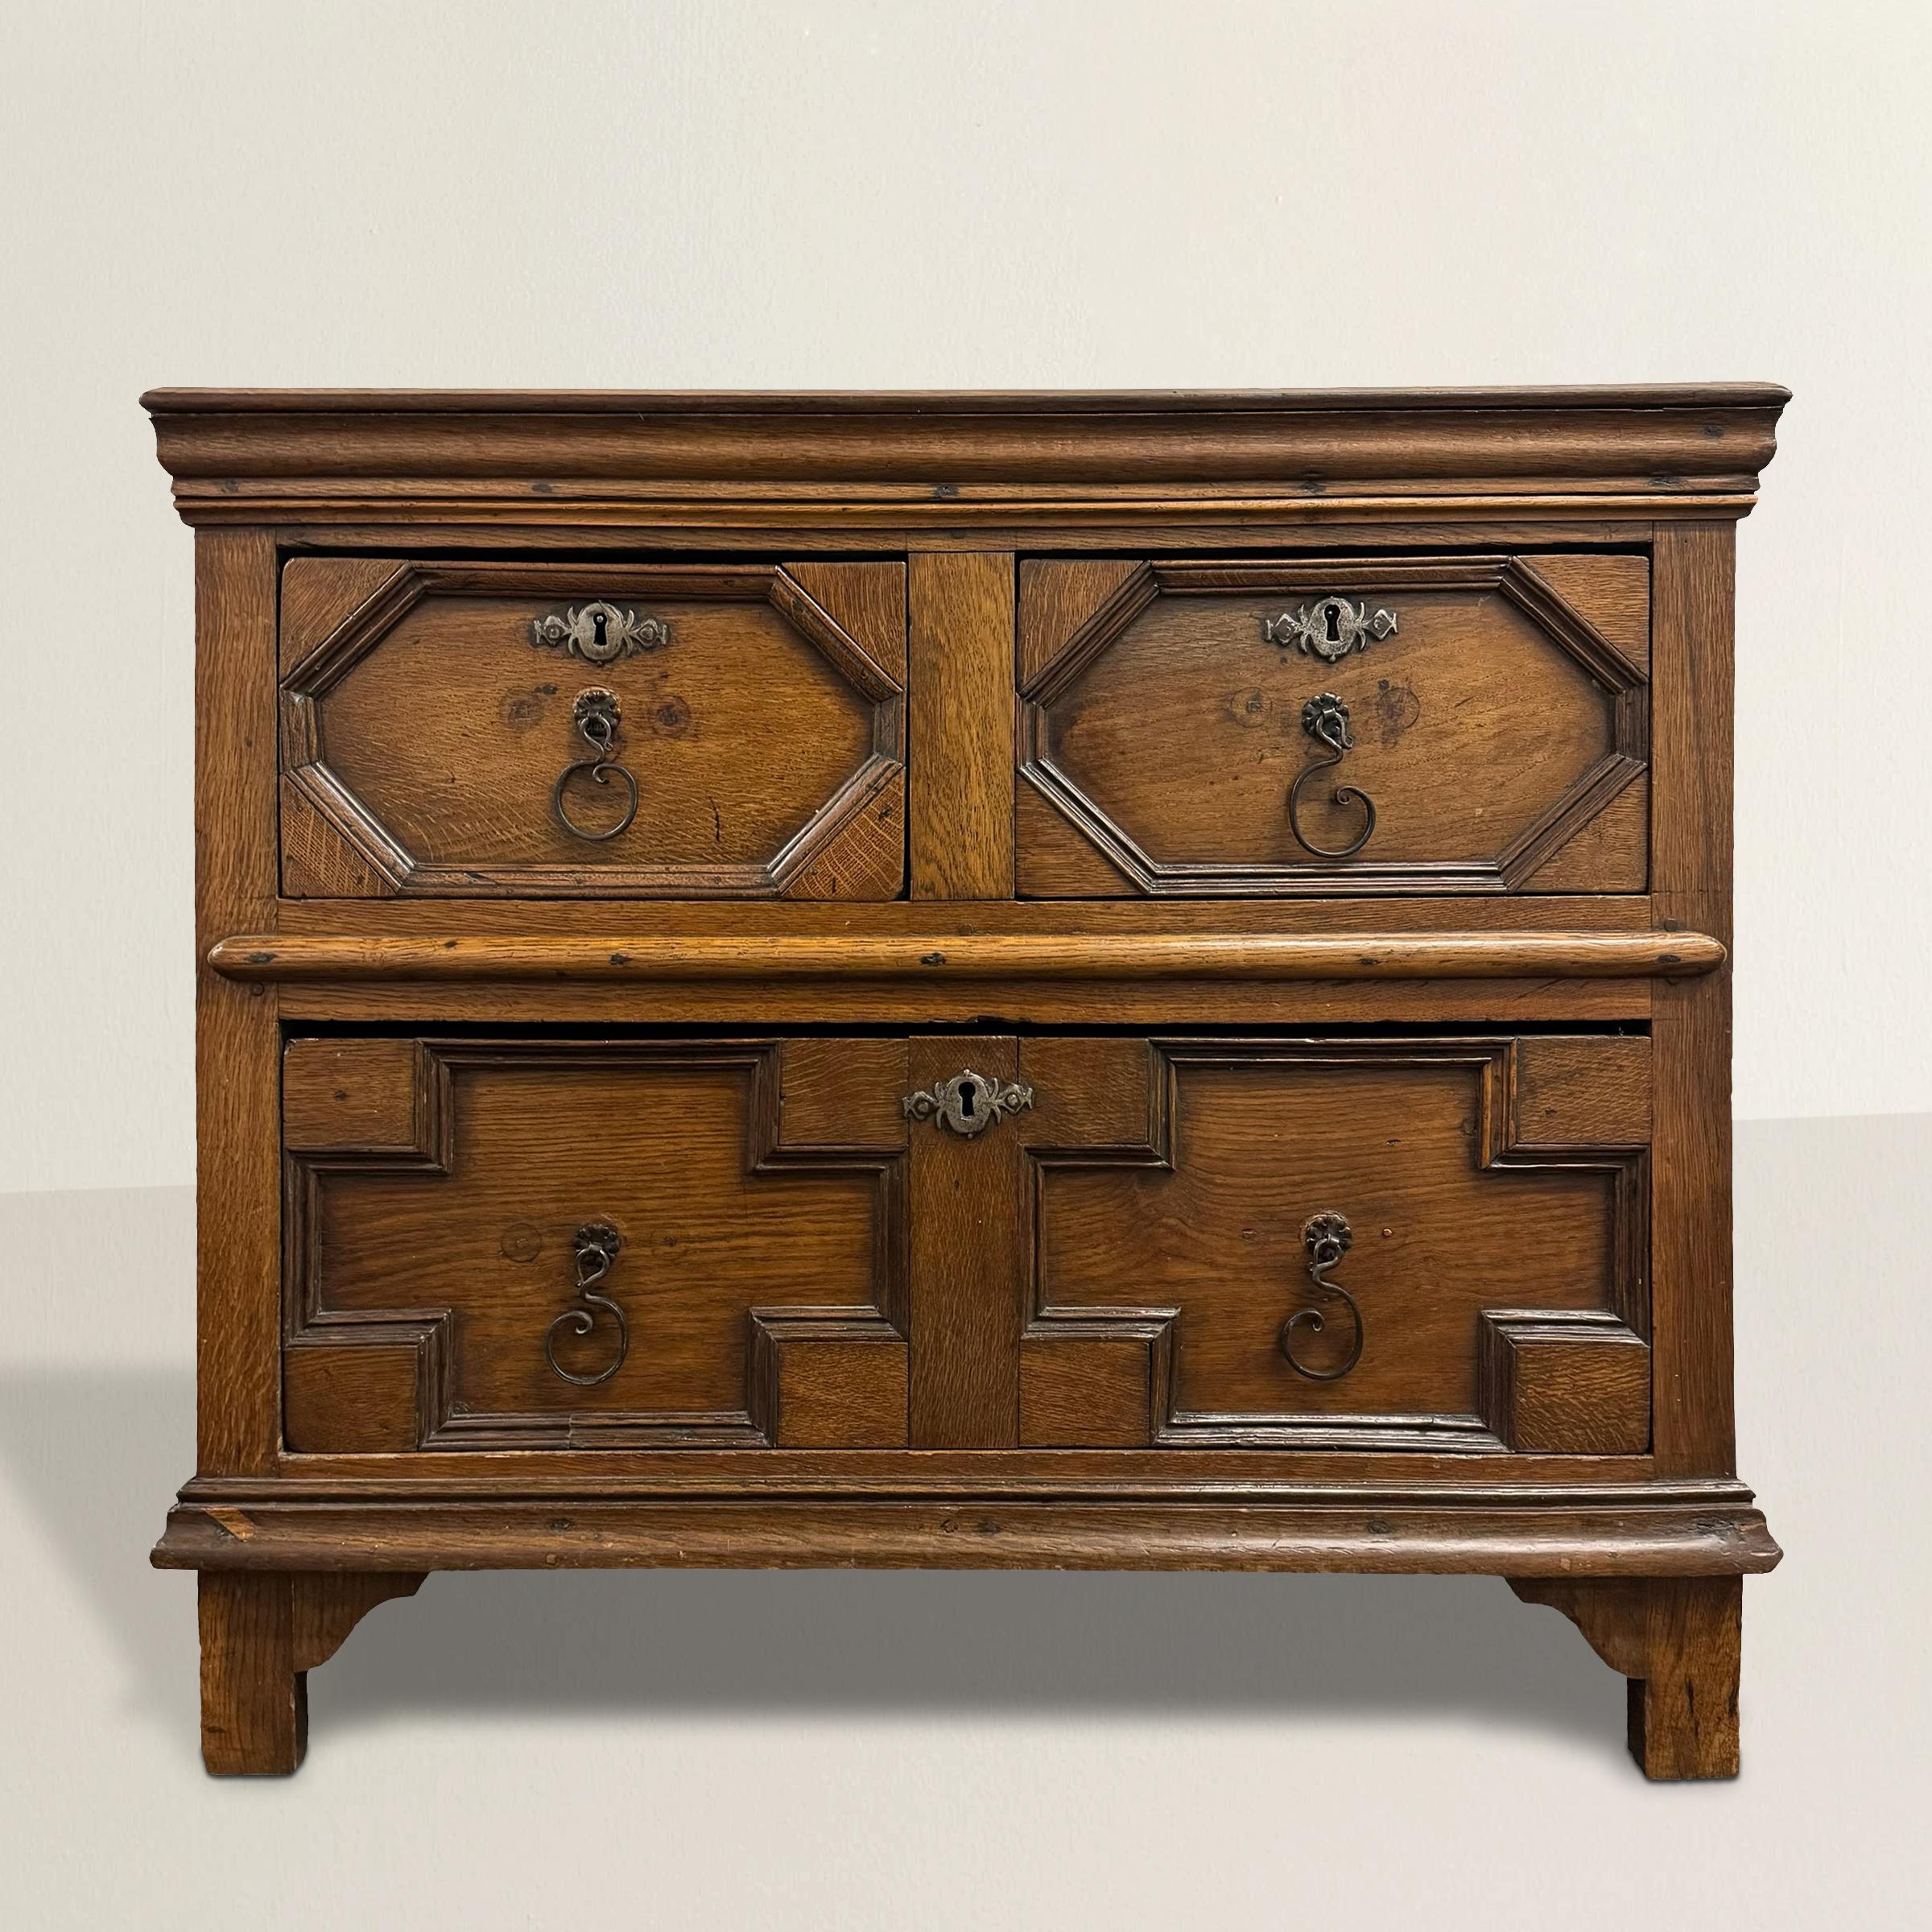 This early 18th-century English William and Mary oak chest of drawers epitomizes the timeless charm and versatility of its era. Featuring characteristic William and Mary styled geometric drawer fronts, this chest exudes both elegance and